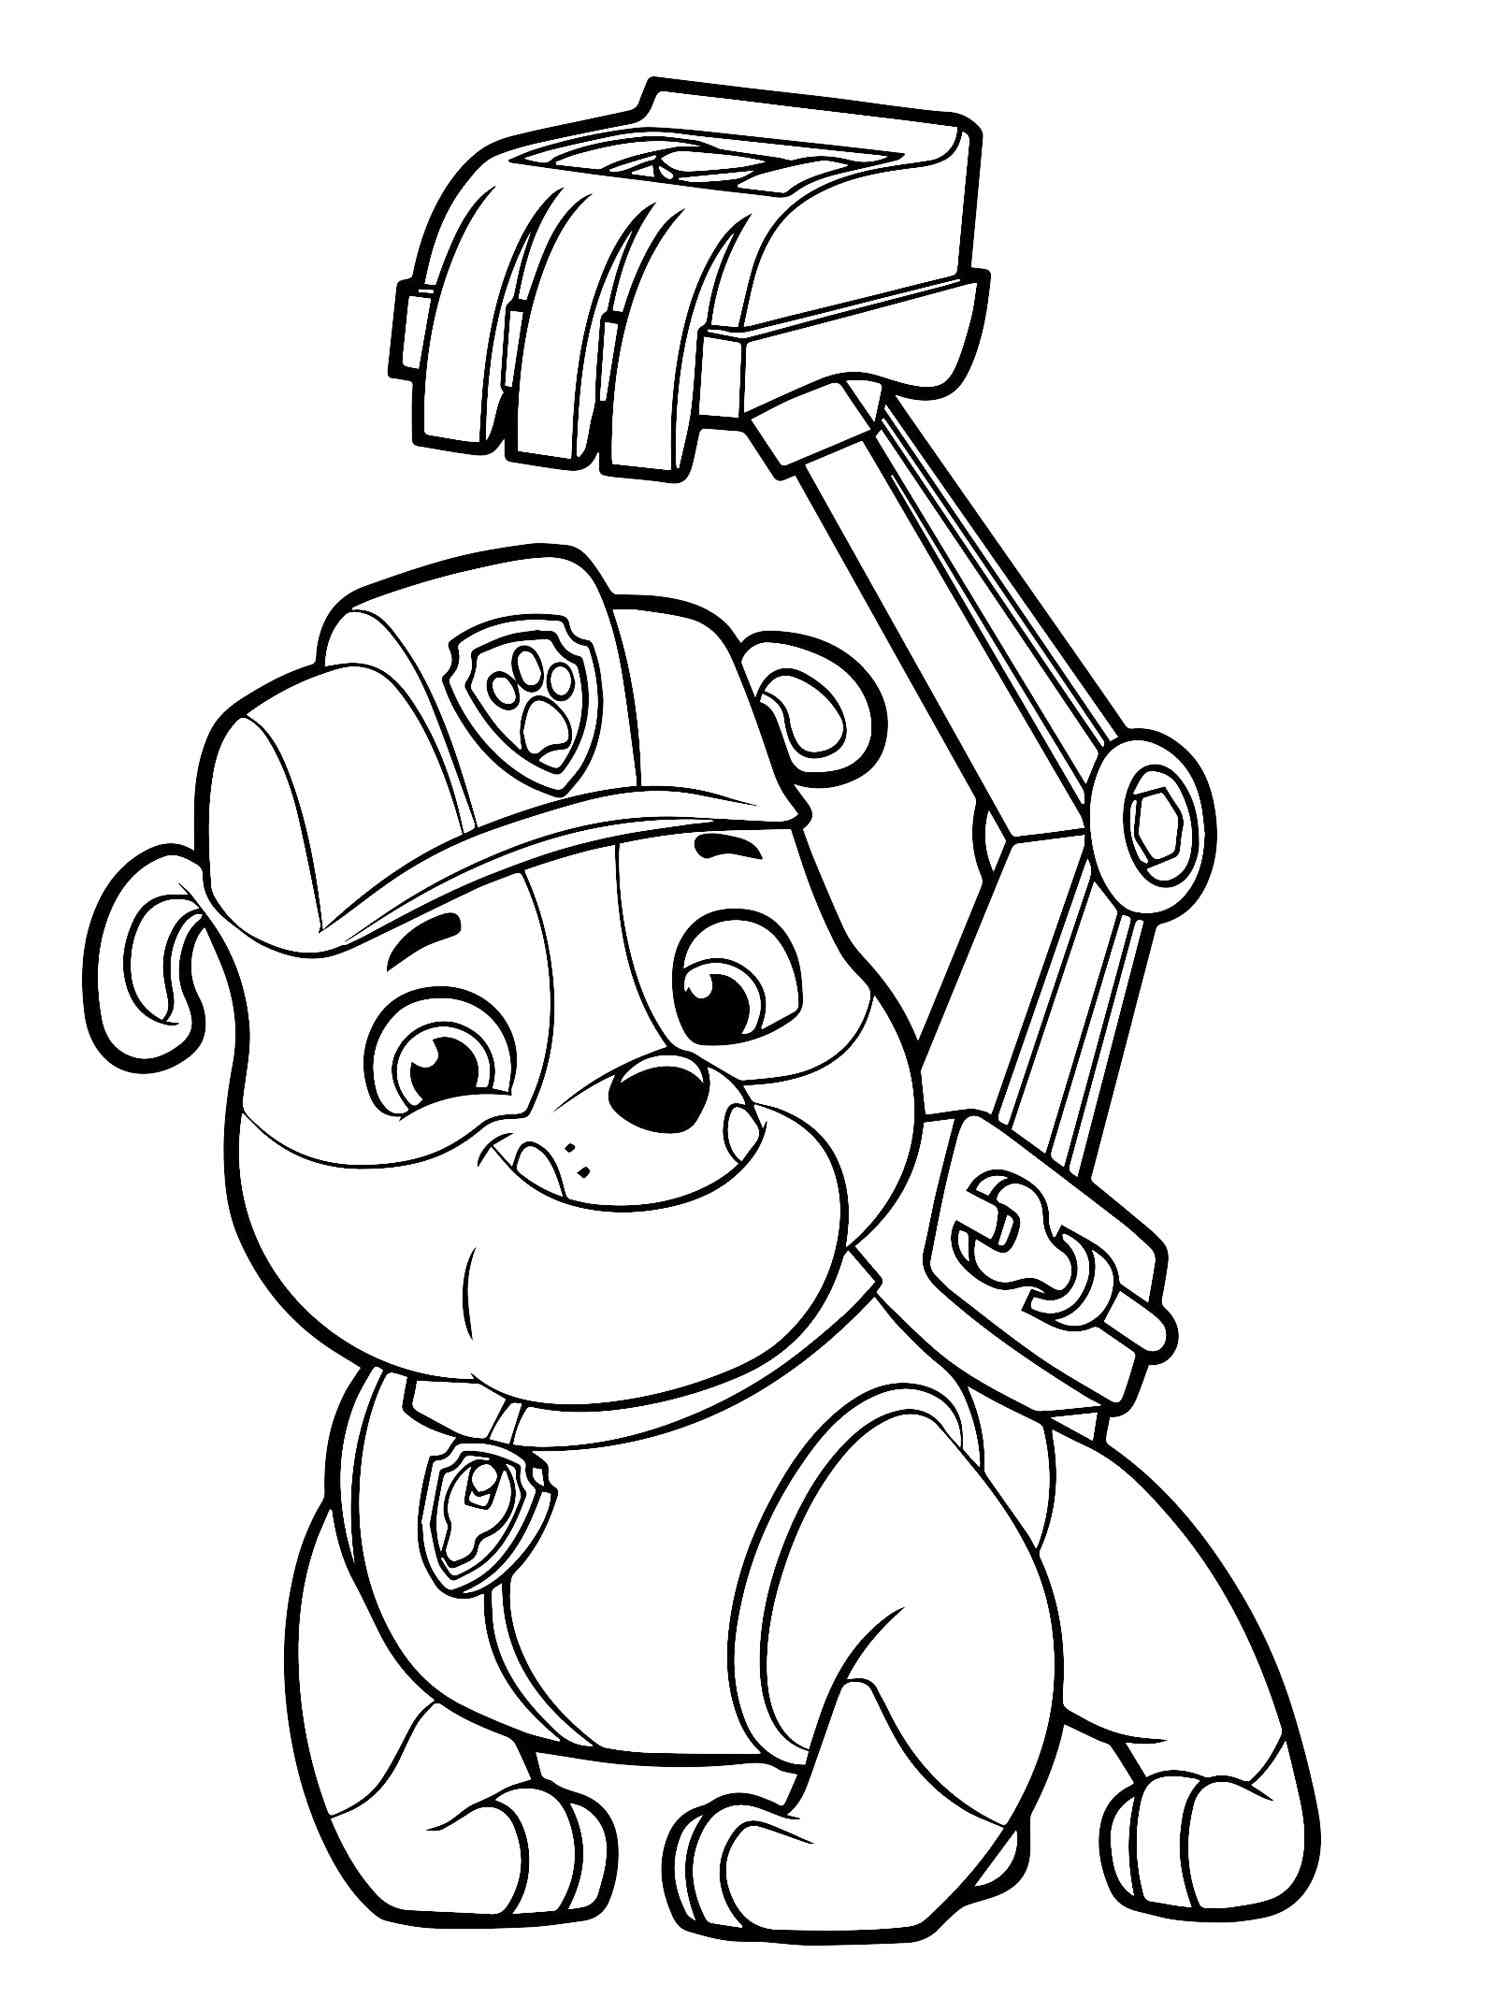 Paw Patrol coloring pages. Free Paw coloring pages.